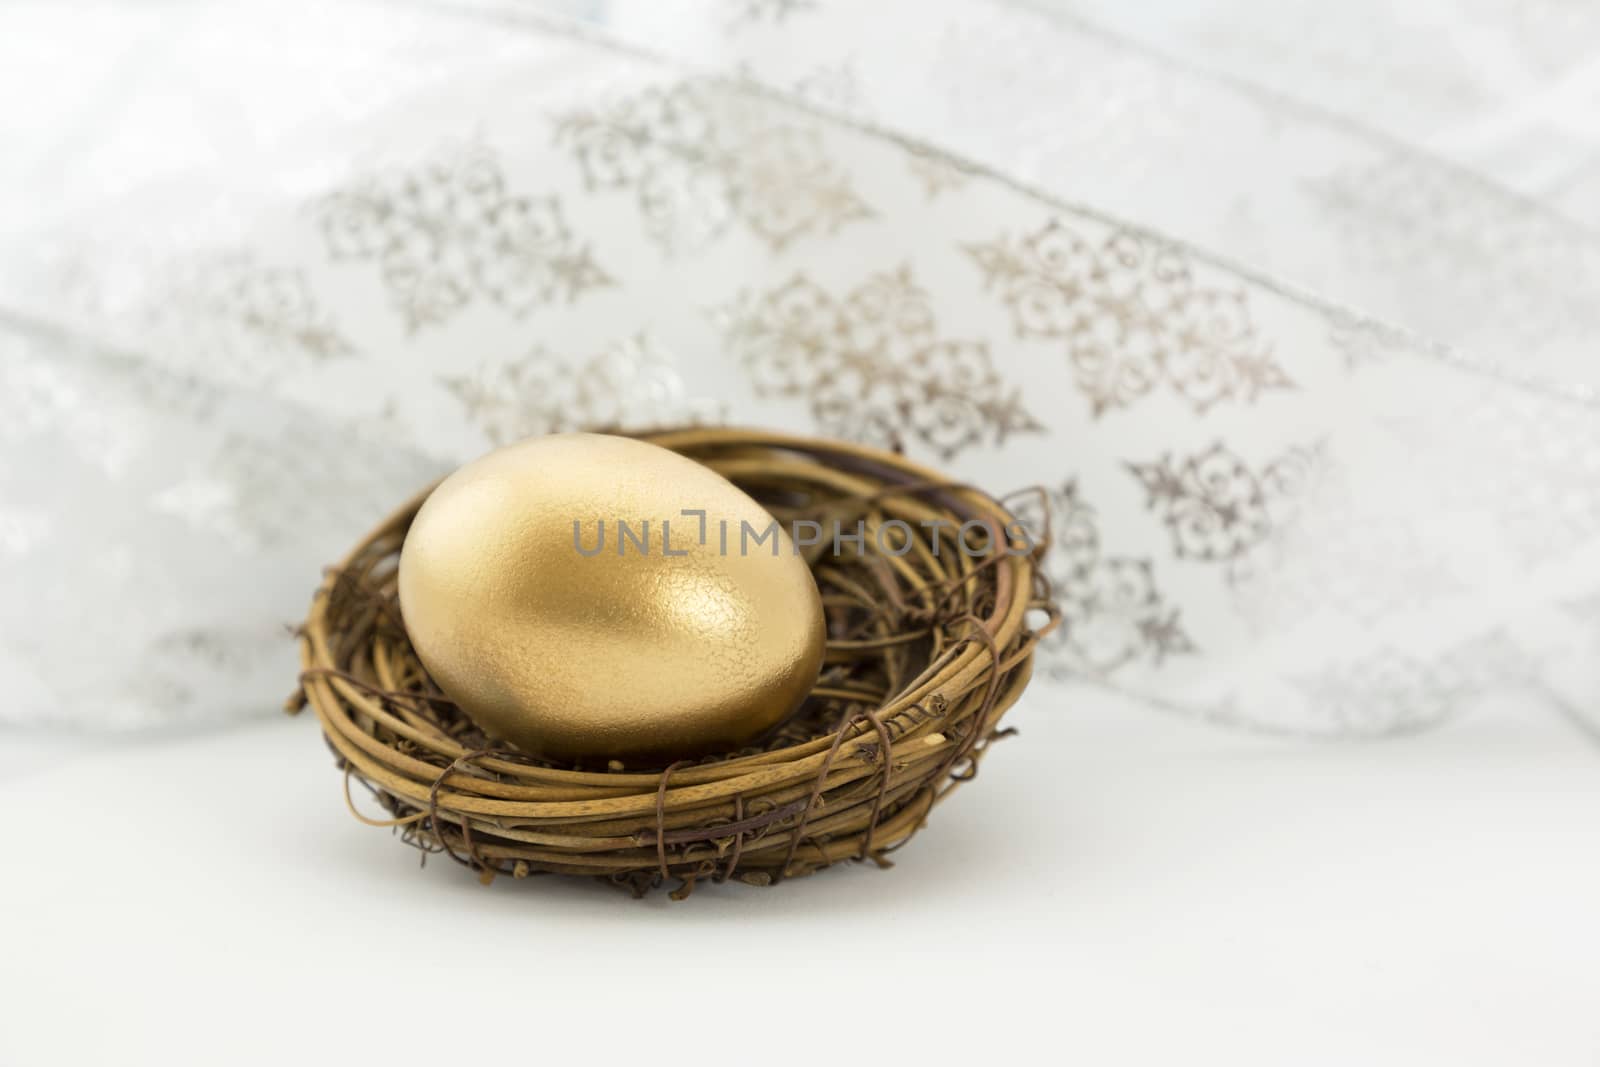 Gold nest egg sits as celebration and success symbol in front of swirl of white ribbons.  Gift of financial security is symbolized. 